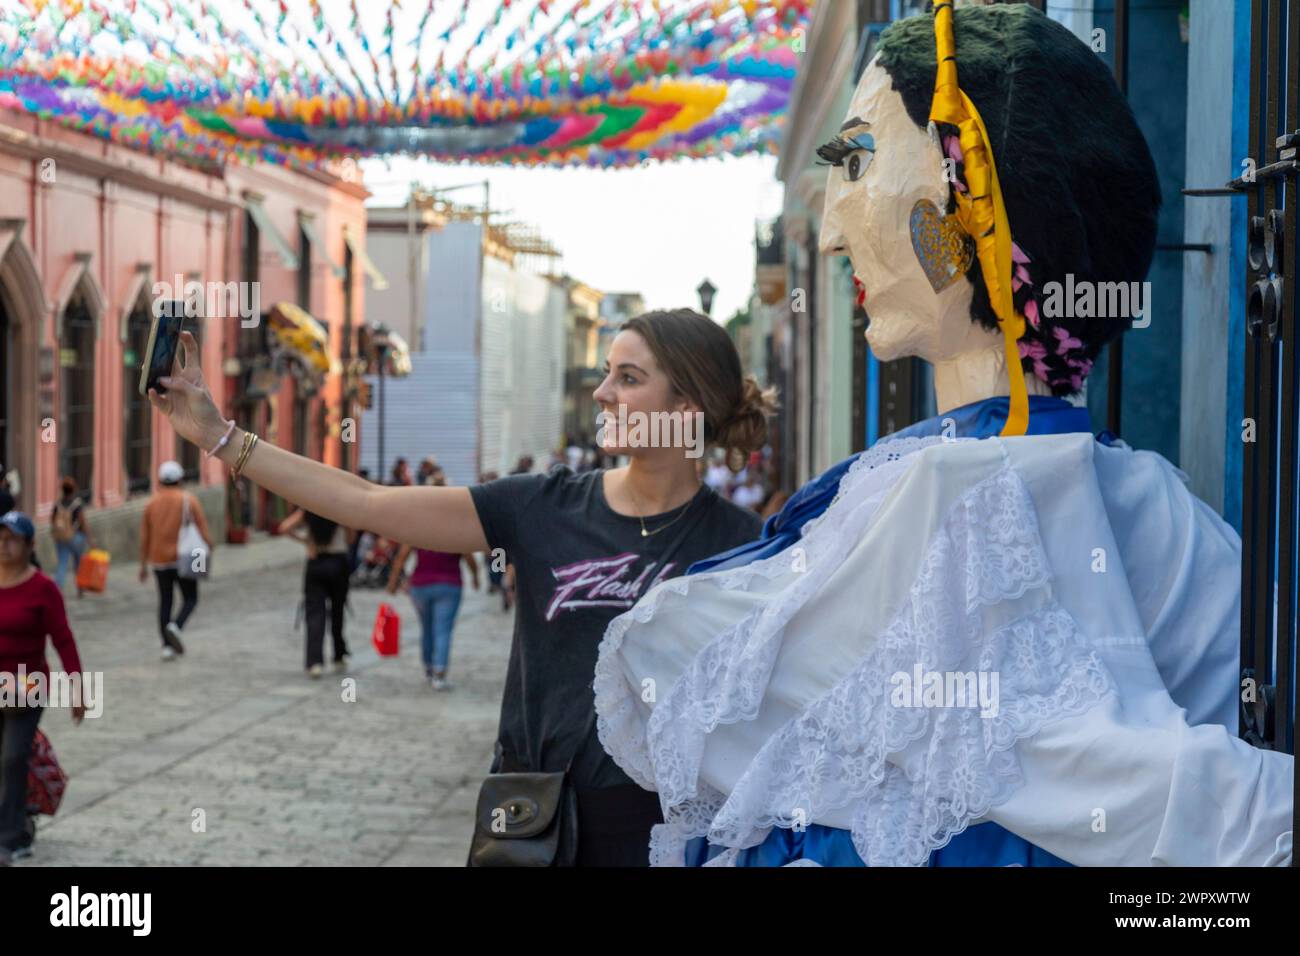 Oaxaca, Mexico - A tourist takes a selfie with a giant papier mache puppet on the Alcala, a pedestrian-only street. Stock Photo